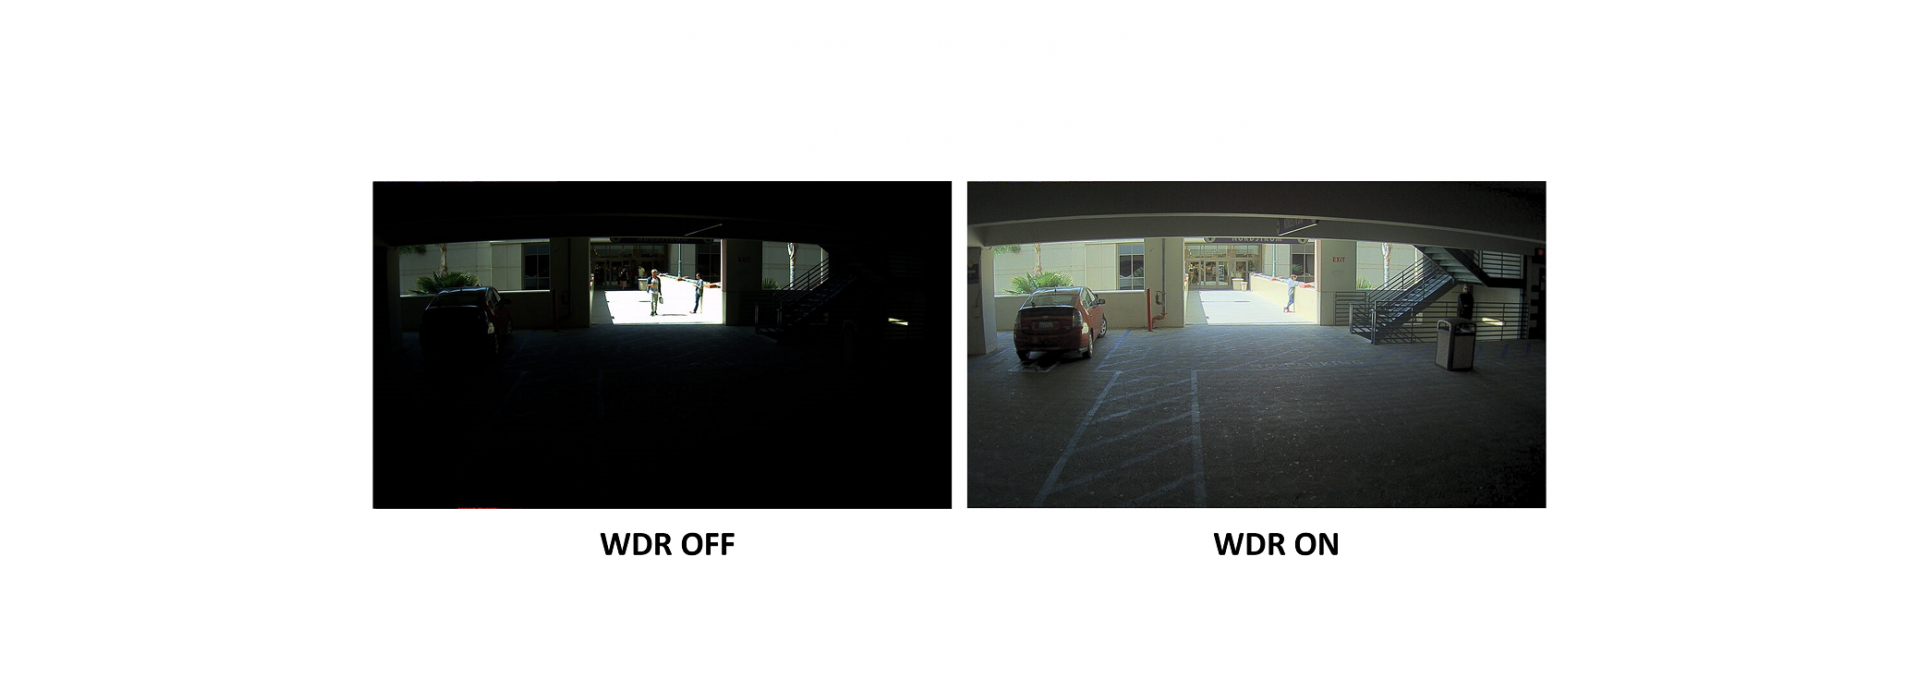 Image Enhancement: D-WDR, Mirror, Rotate, and Defogging functions